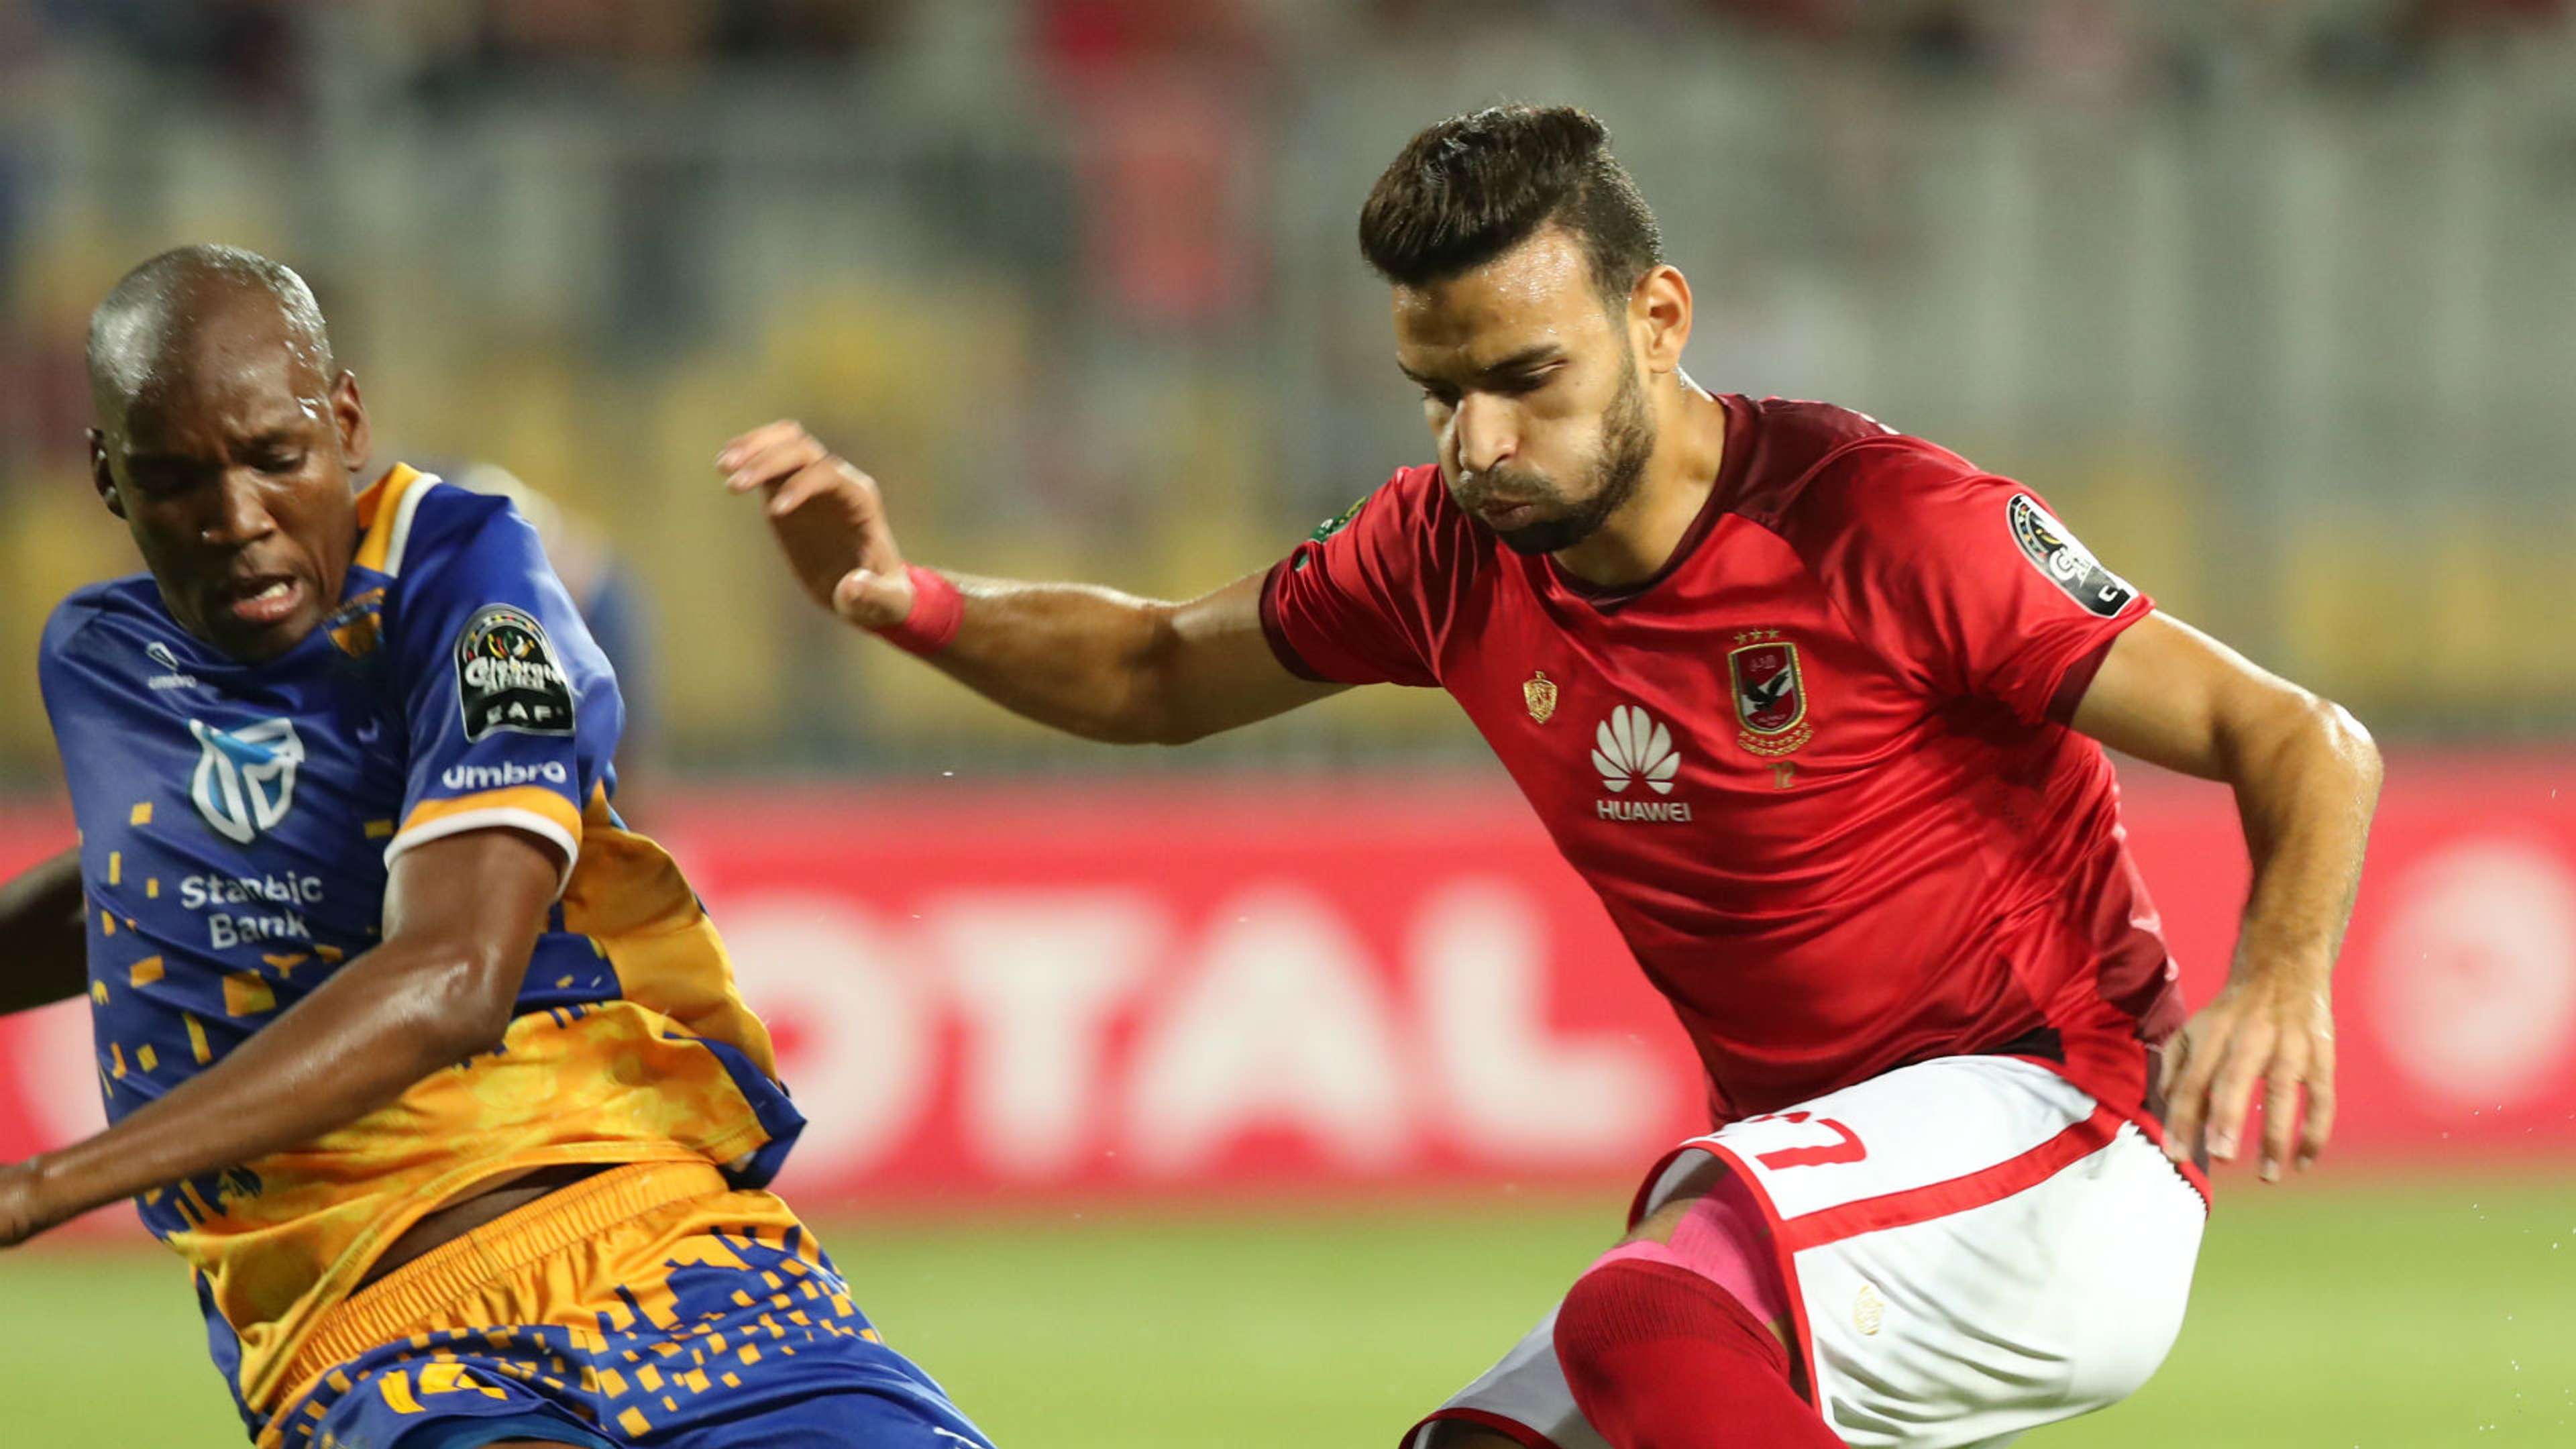 Al Ahly player Mohamed Gaber (R) in action against Township Rollers player Obuile Ncenga (L) , July 2018